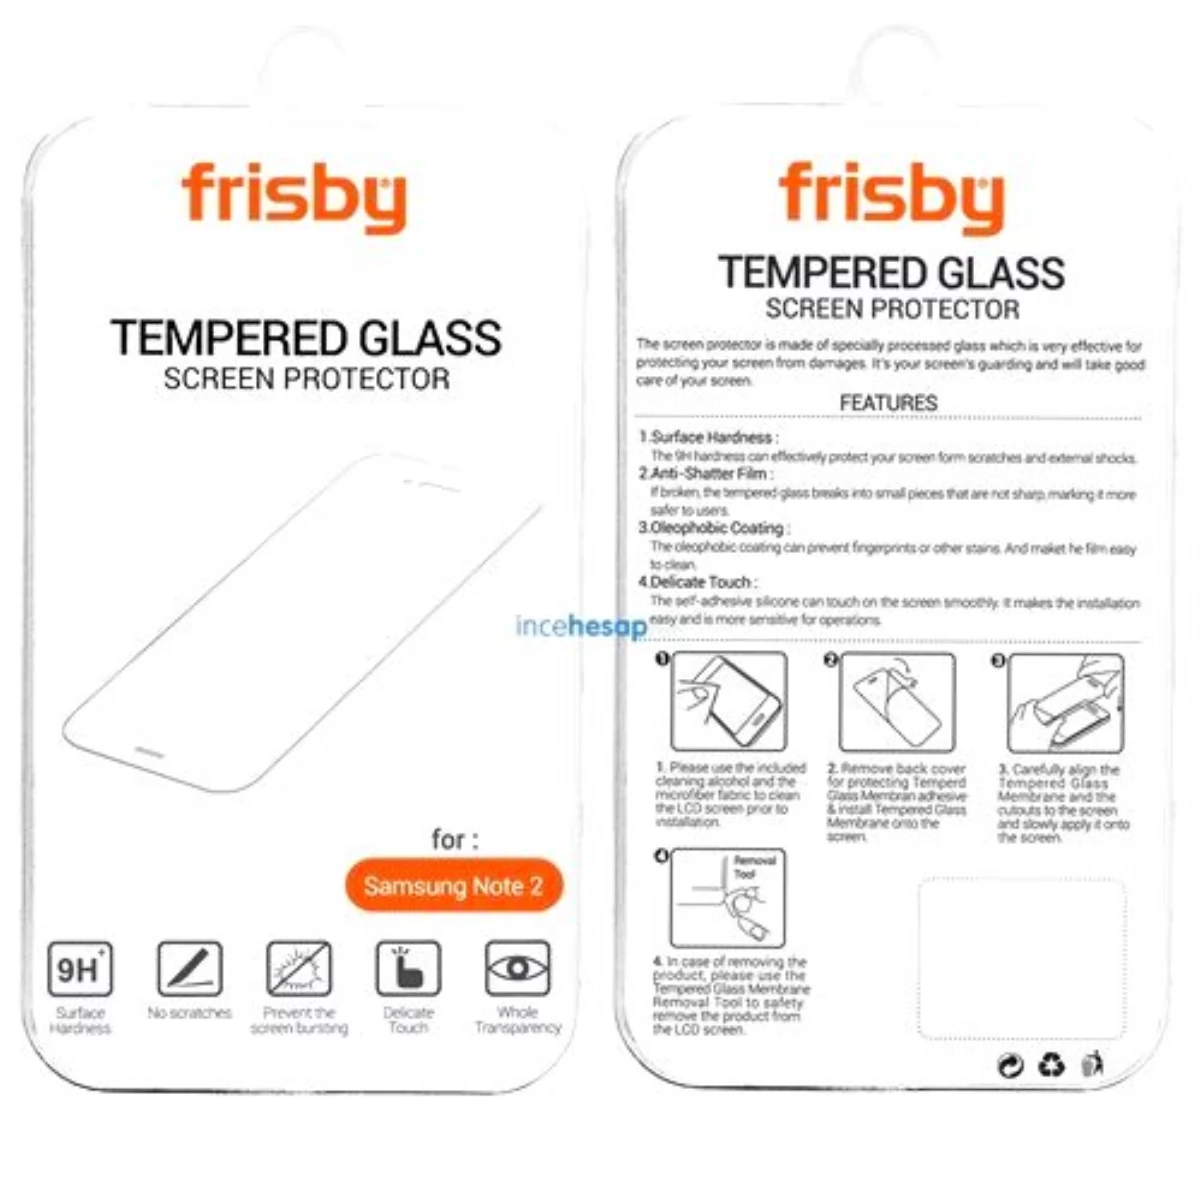 Frisby Ftg-Sm7058 Samsung N7100/note2 Tempered Glass